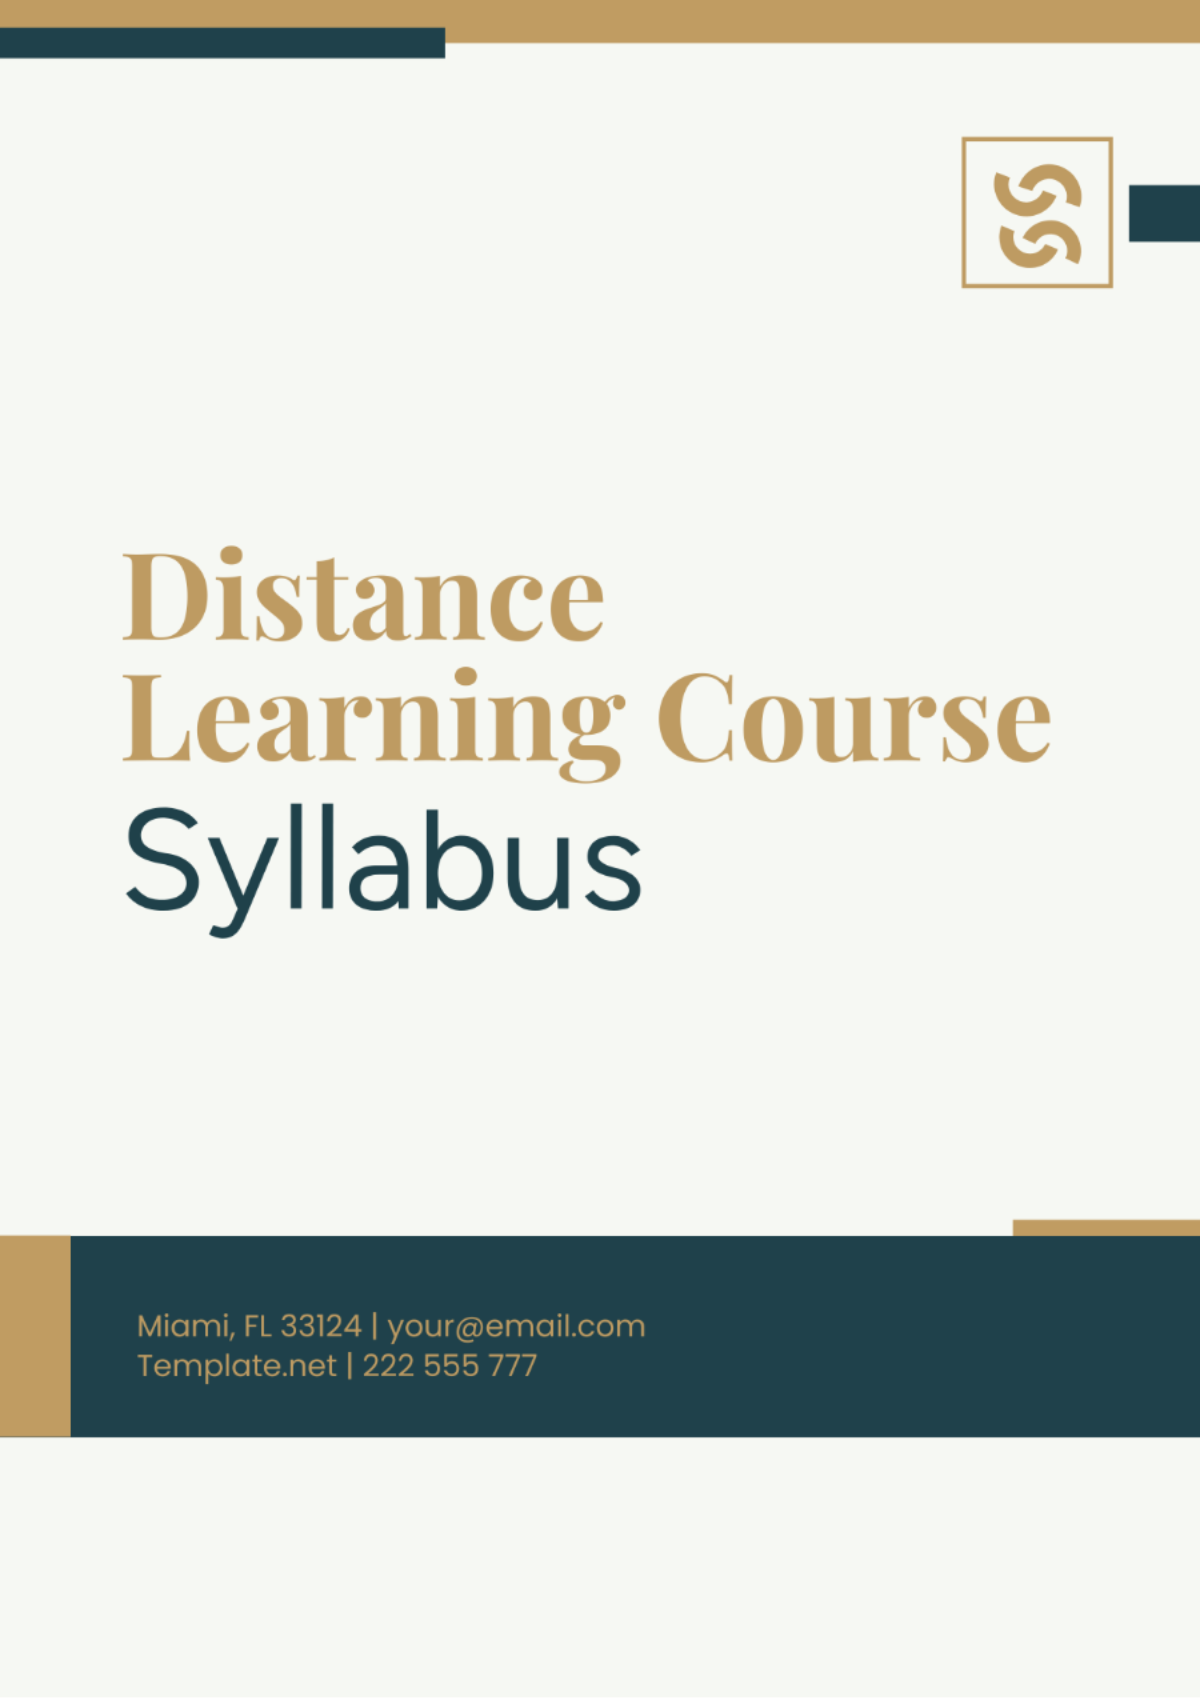 Distance Learning Course Syllabus Template